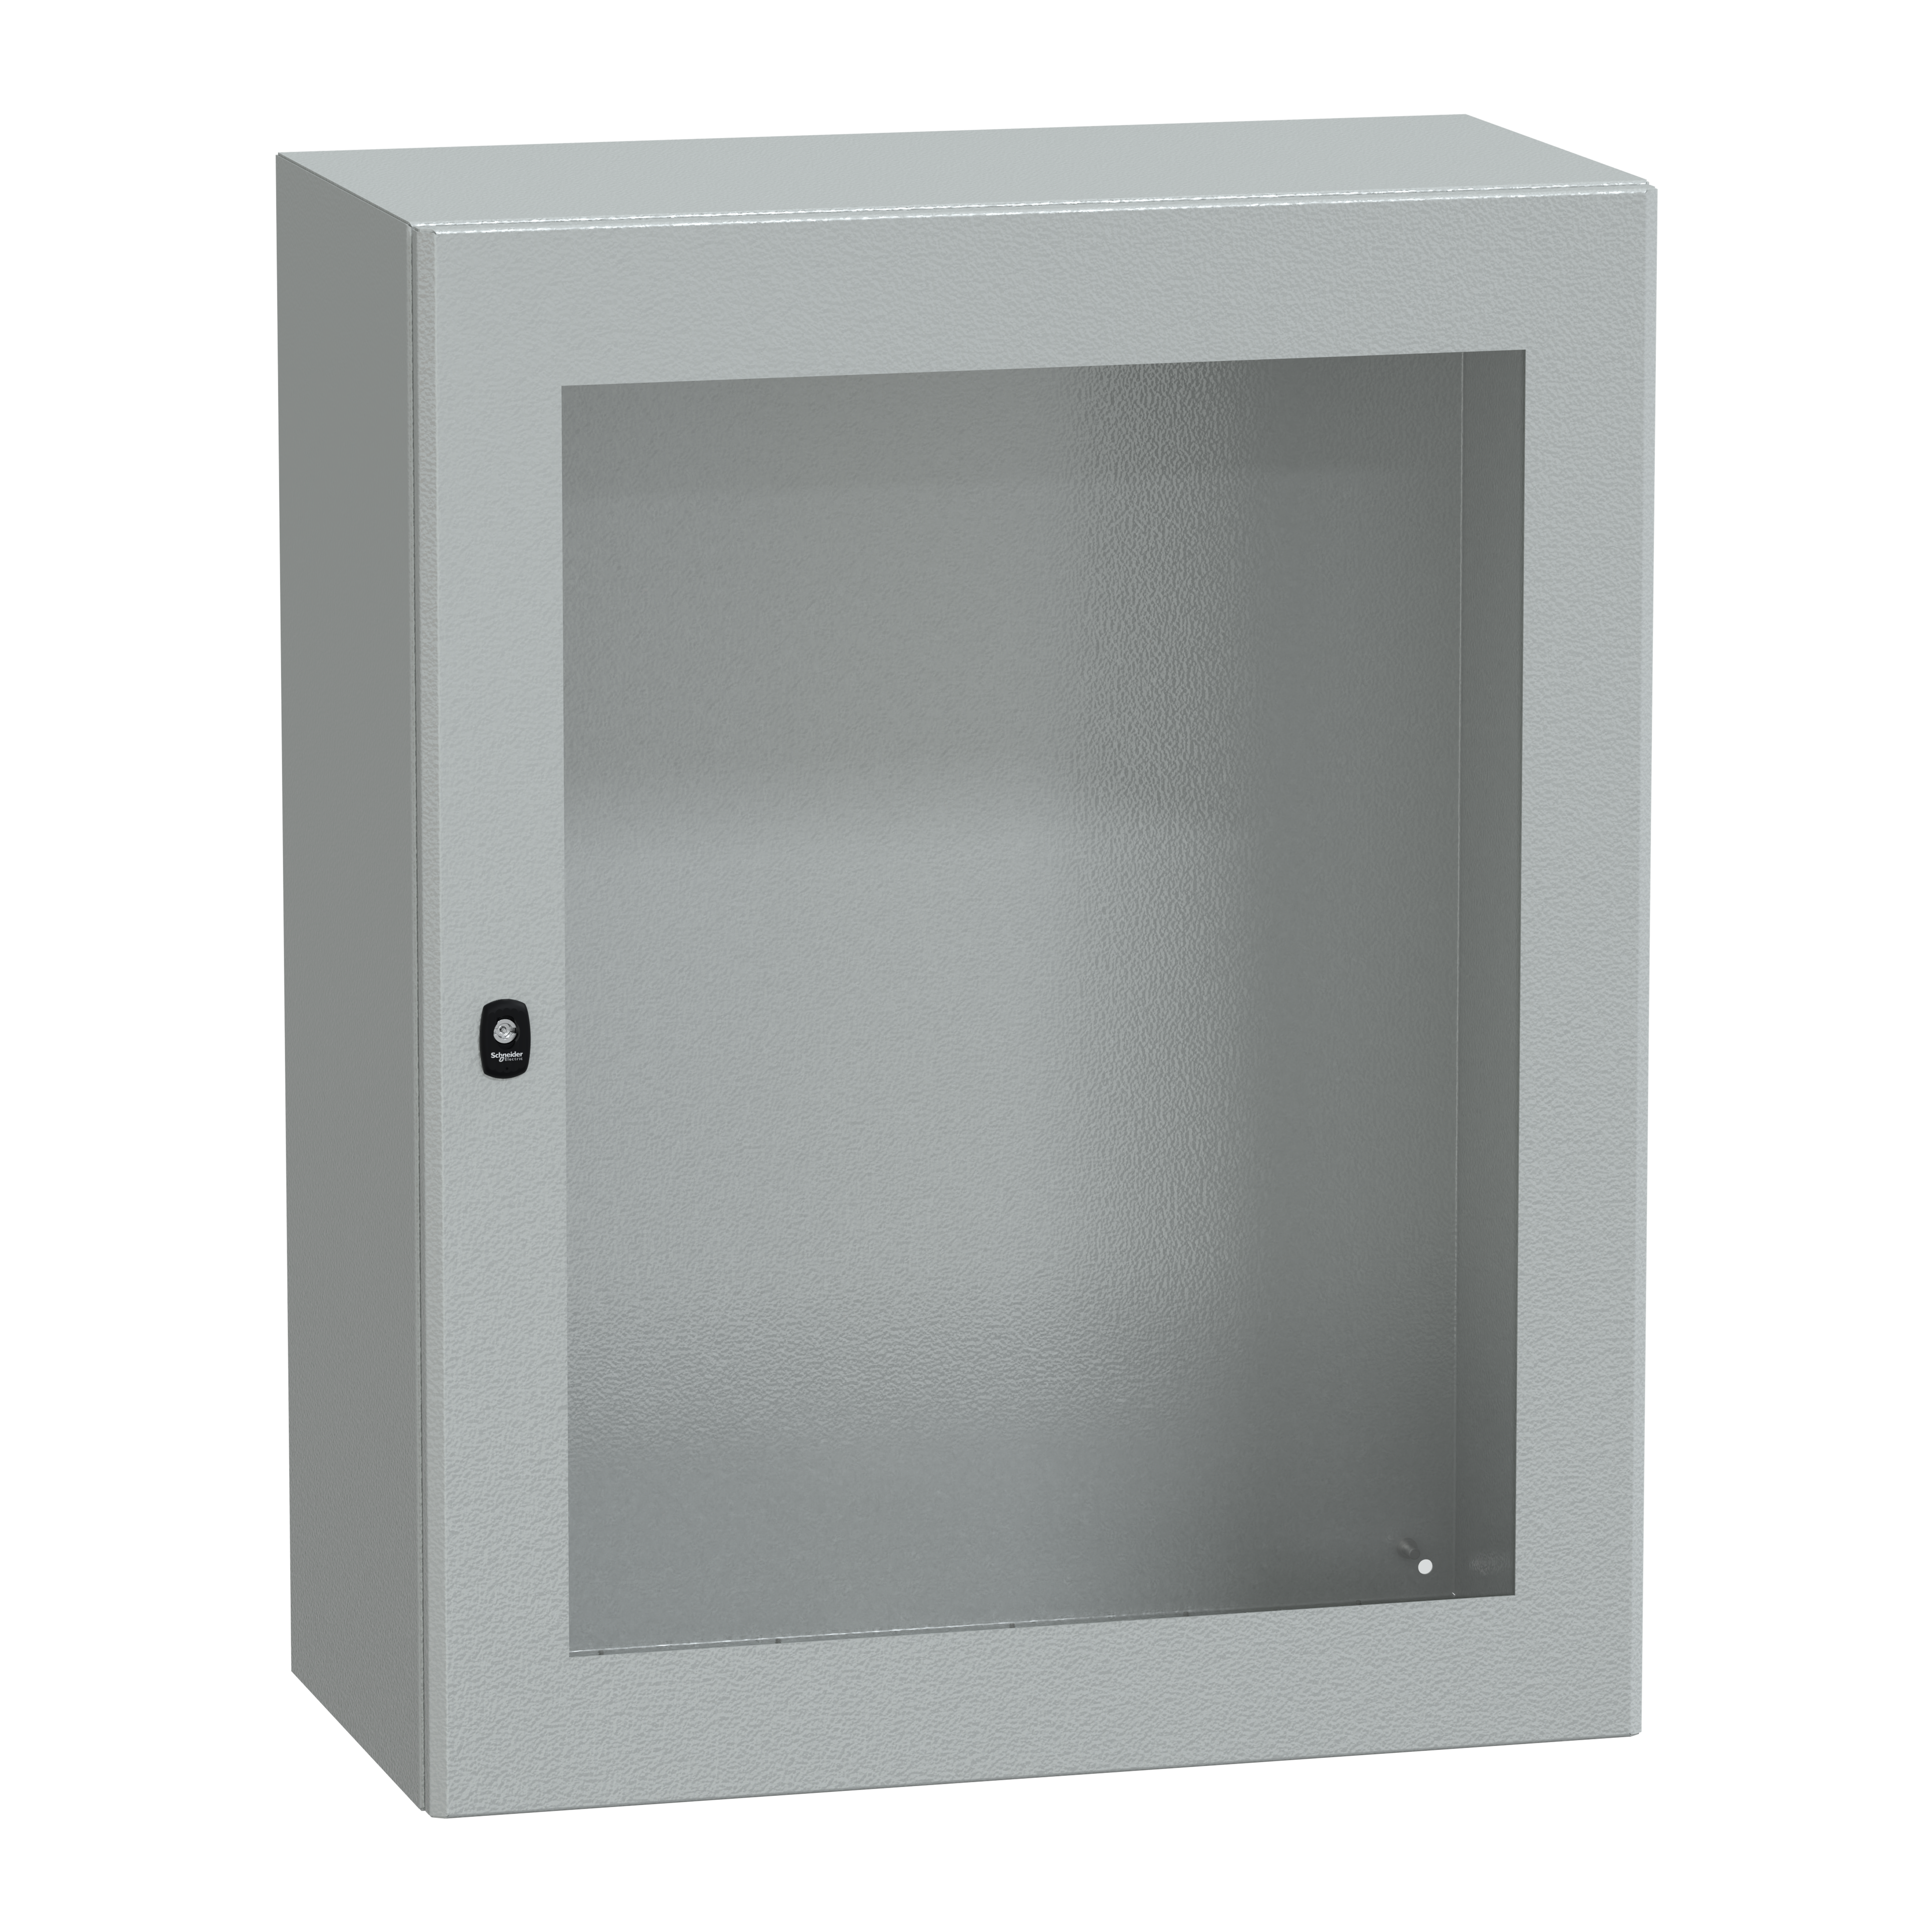 Wall mounted steel enclosure, Spacial S3D, transparent door, without mounting plate, 1000x800x400mm, IP66, IK08